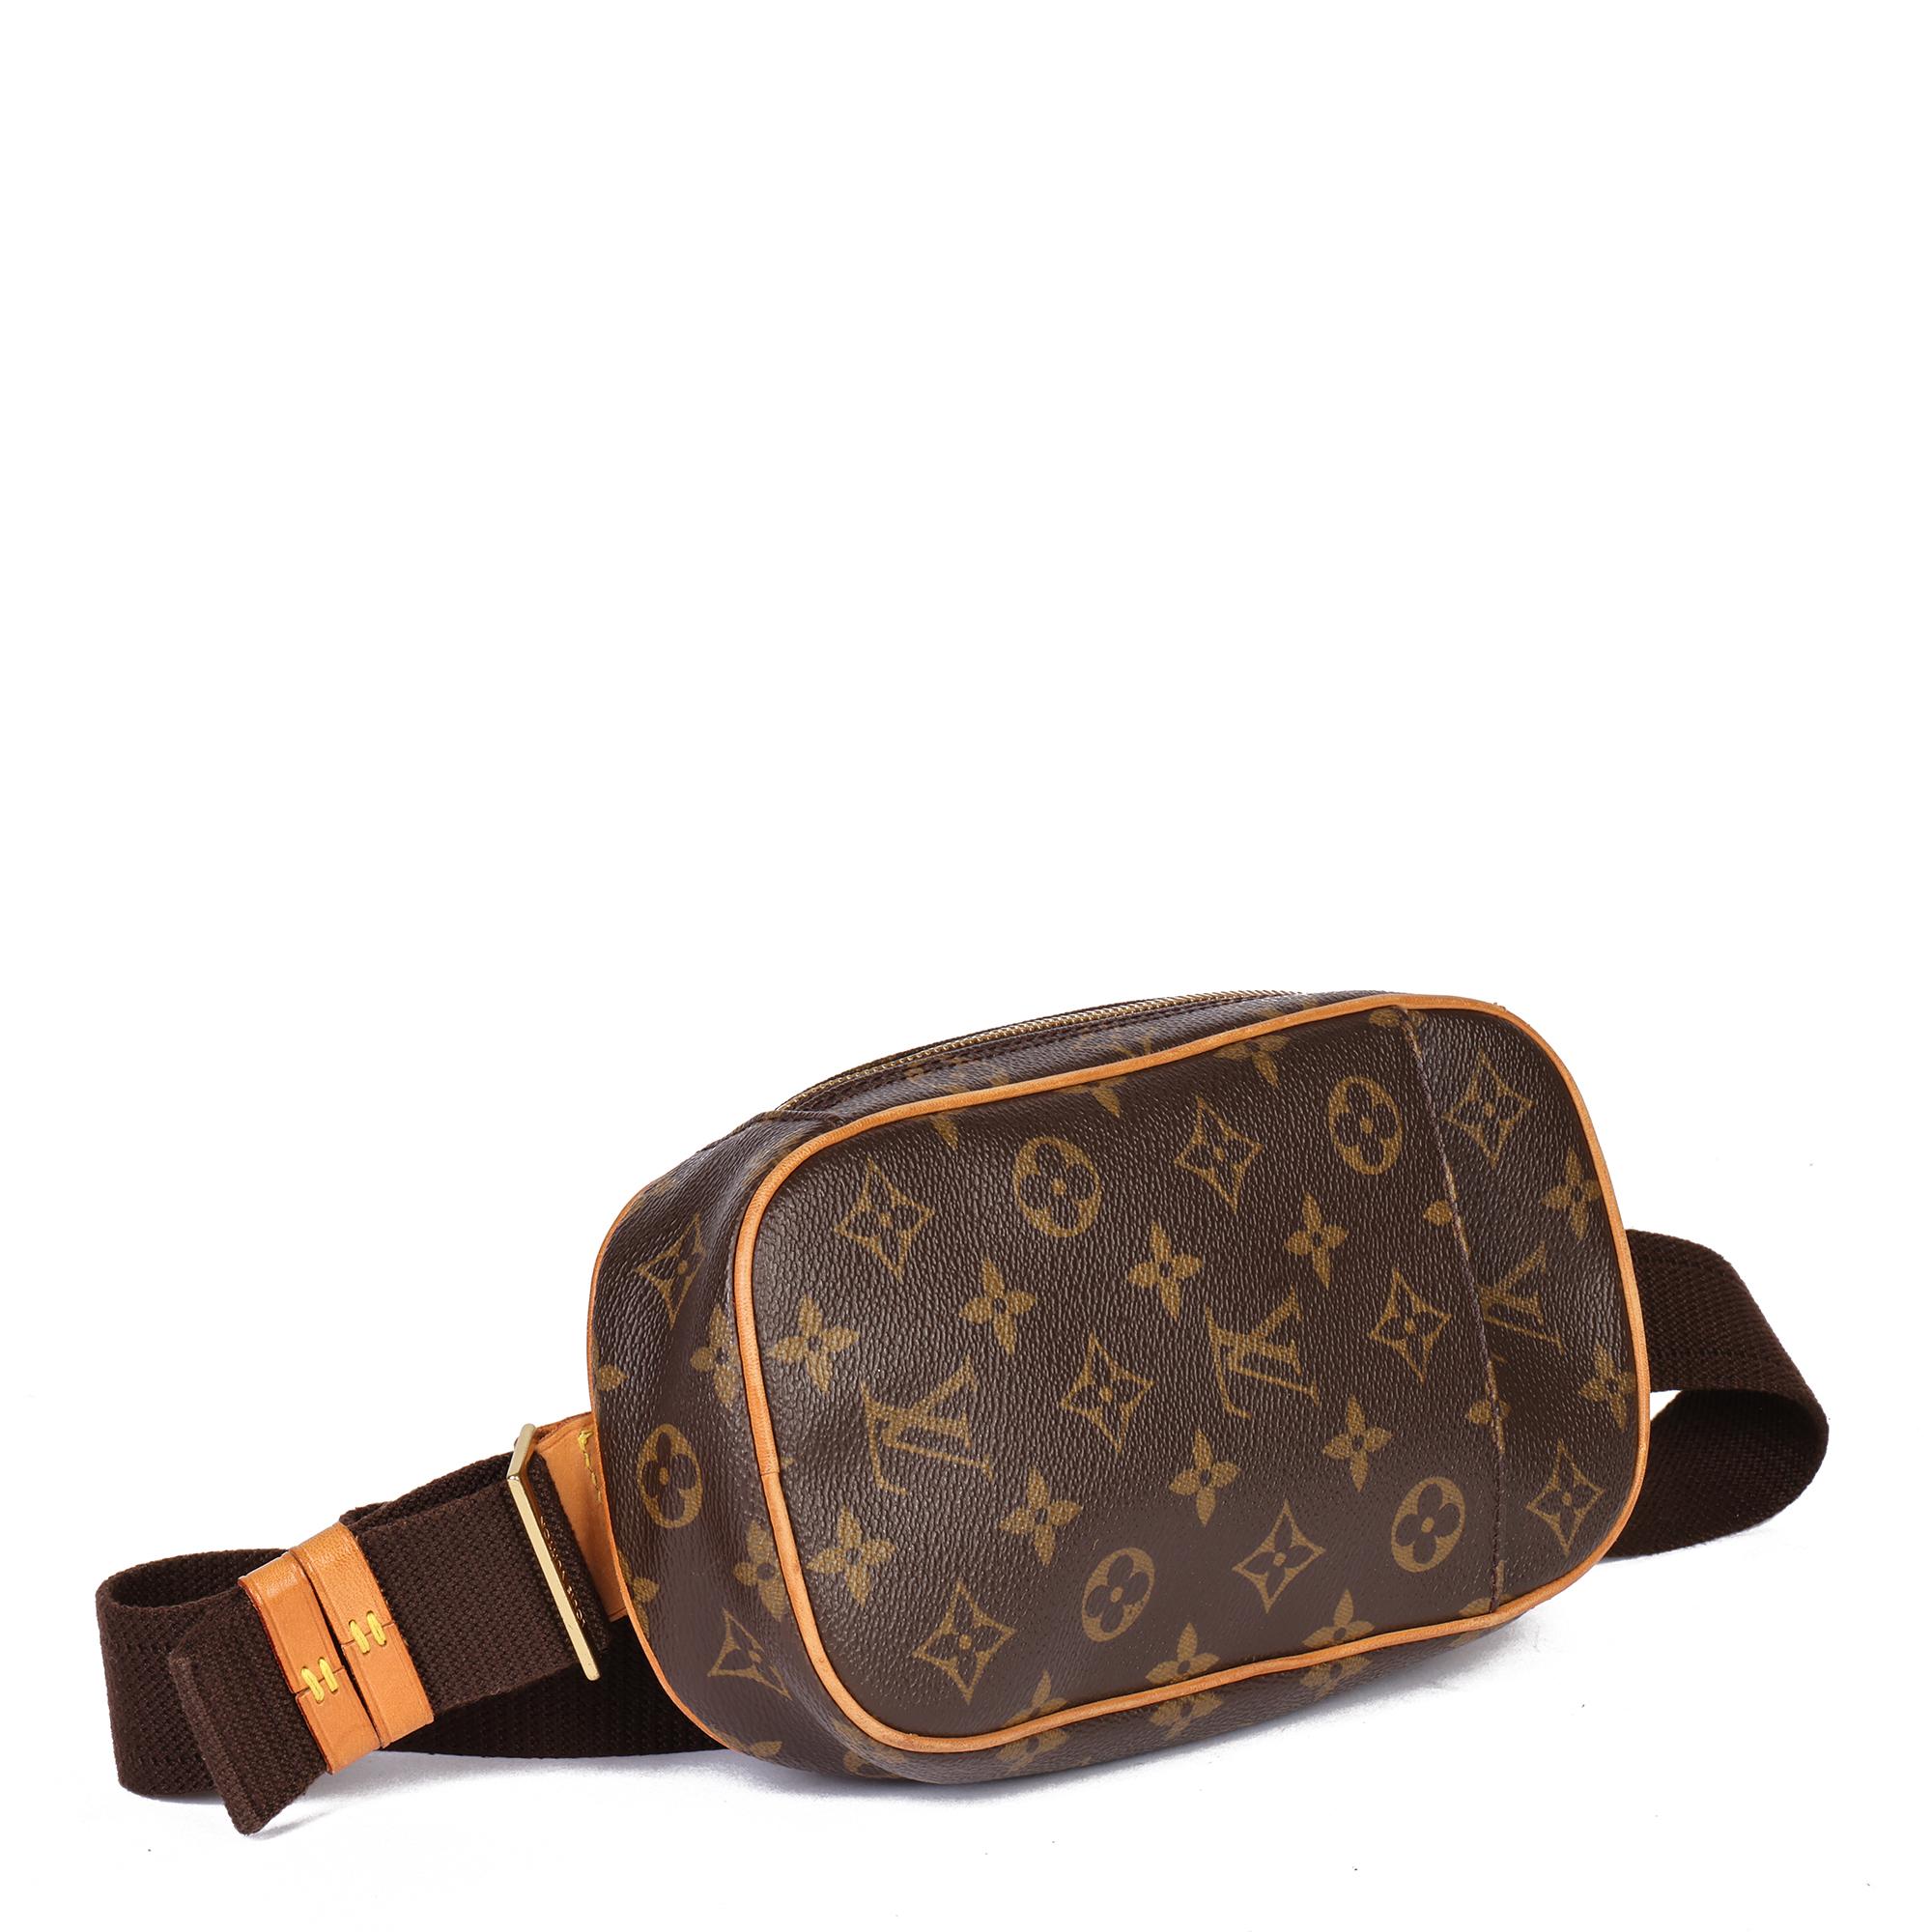 LOUIS VUITTON
Brown Monogram Coated Canvas & Vachetta Leather Pochette Gange

Xupes Reference: HB4807
Serial Number: CA0061
Age (Circa): 2001
Authenticity Details: Date Stamp (Made in Spain)
Gender: Ladies
Type: Shoulder, Crossbody

Colour: